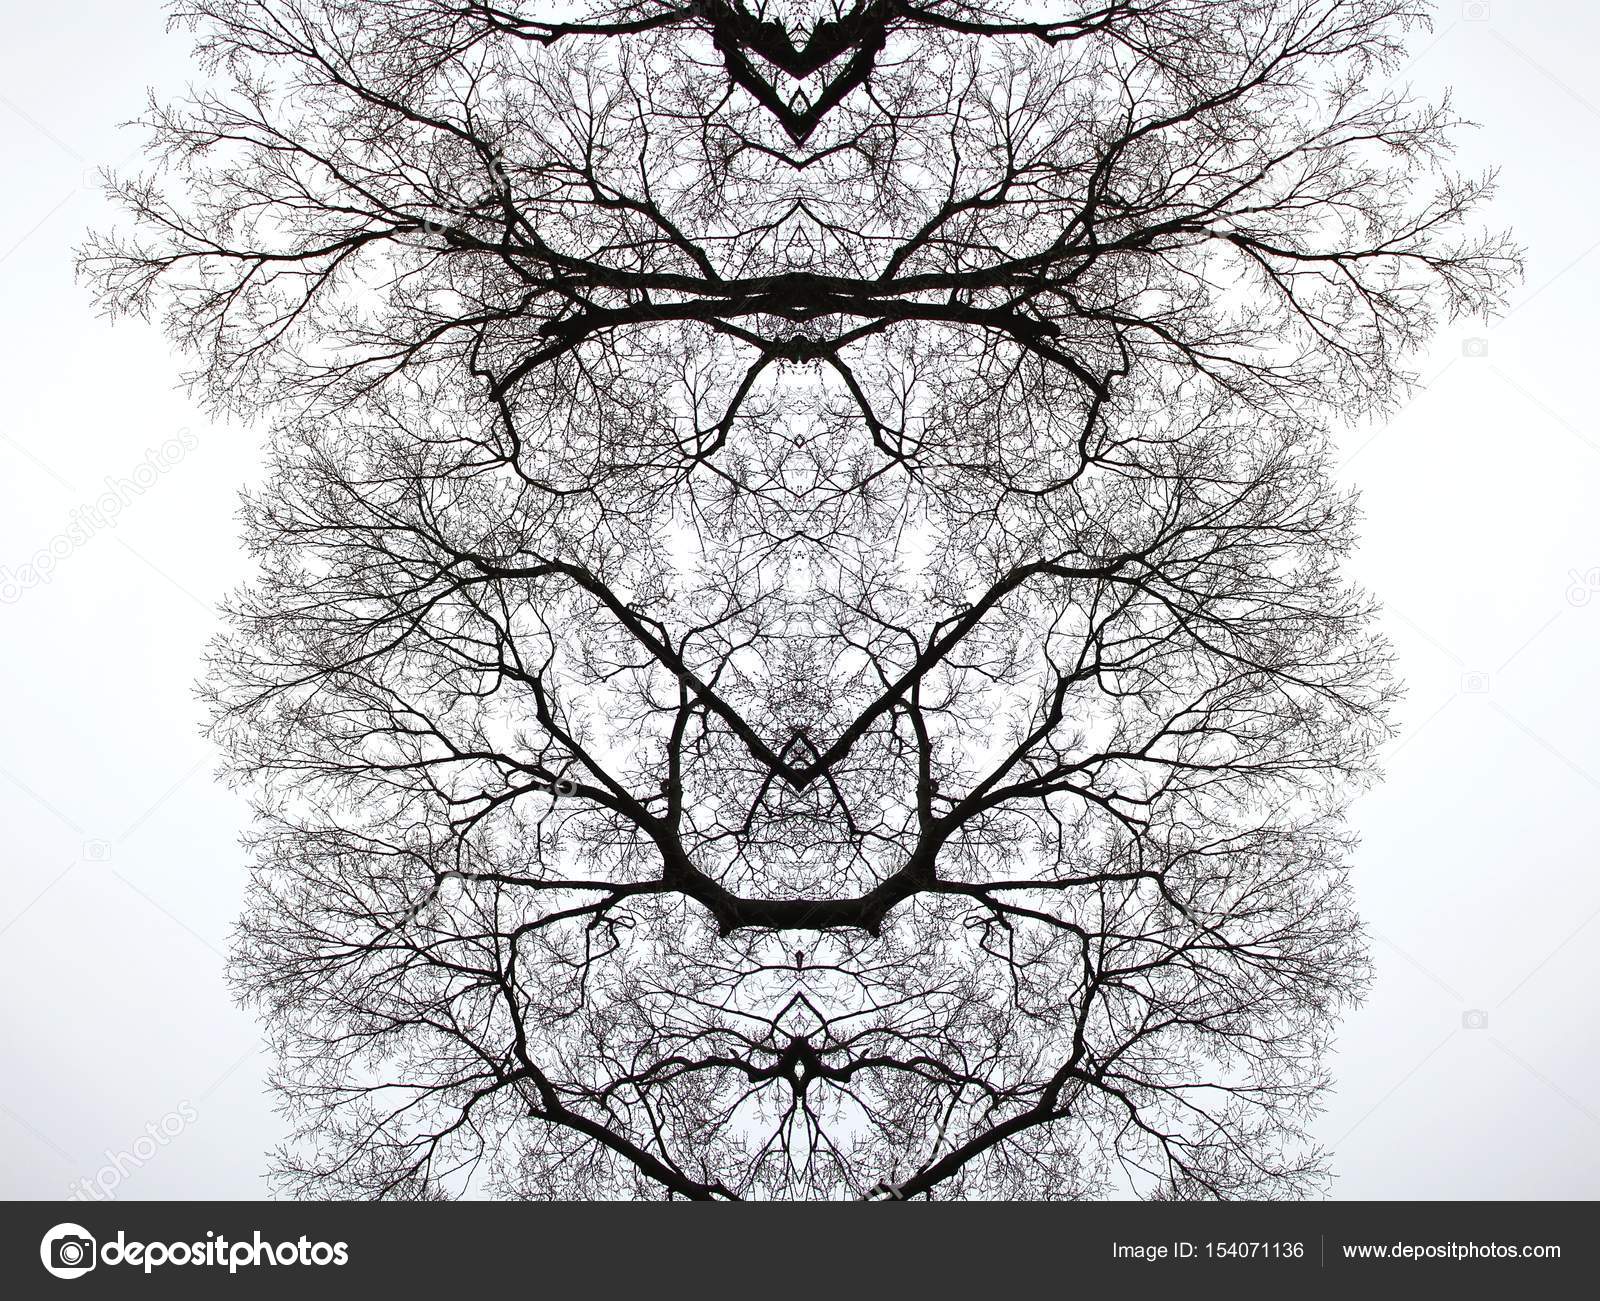 Tree branches, abstract concept. — Stock Photo © Artfully79 #154071136